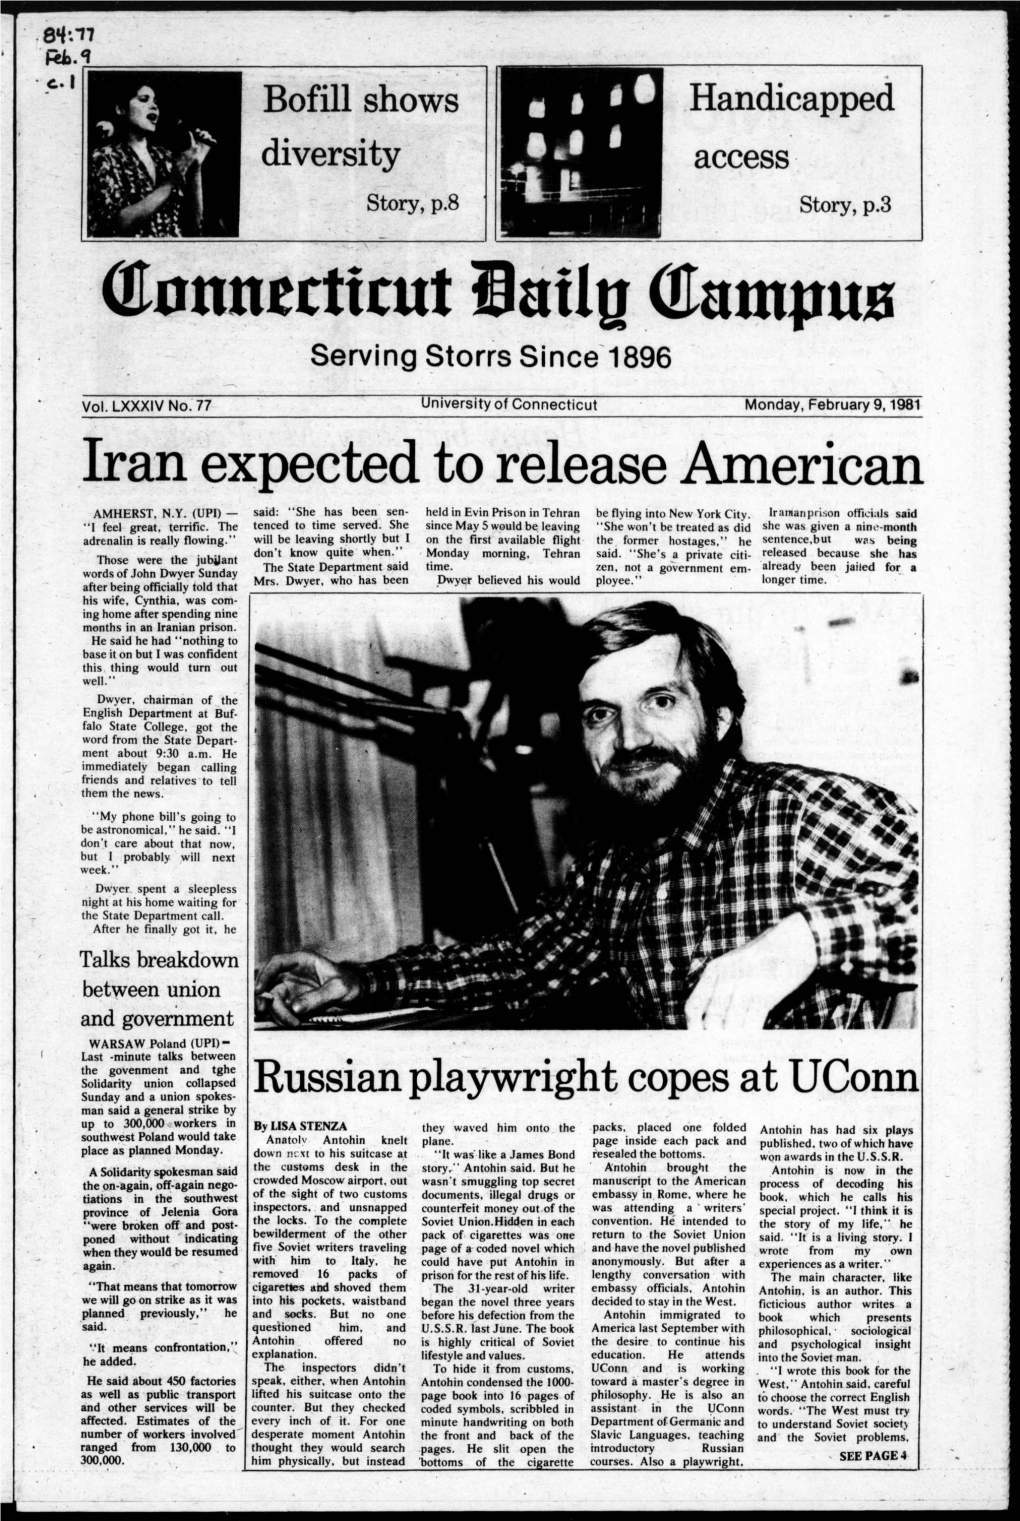 Iran Expected to Release American AMHERST, N.Y